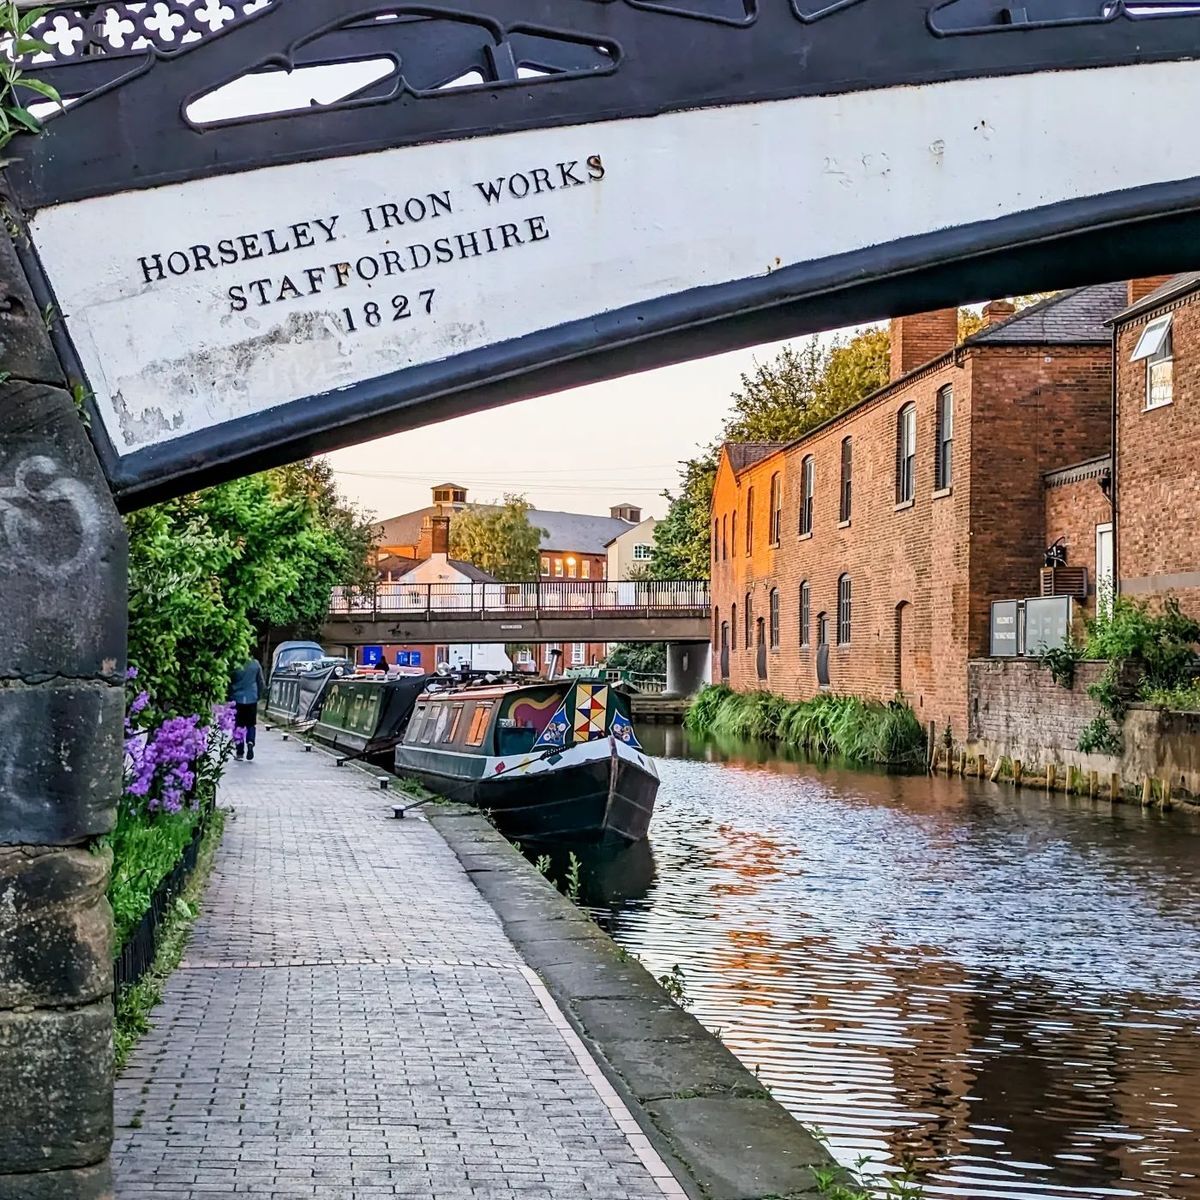 <p>Birmingham is known for its remarkable <a href="https://www.birmingham.gov.uk/info/50050/culture_arts_and_heritage/179/canals_of_birmingham">network of canals</a> which date back to the 1700s and 1800s. The scenic transport links played a central role in the Industrial Revolution. Flashforward to modern times, and Brindley Place boasts a variety of shops, bars, and restaurants, all set against the stunning backdrop of the city’s canals.</p>